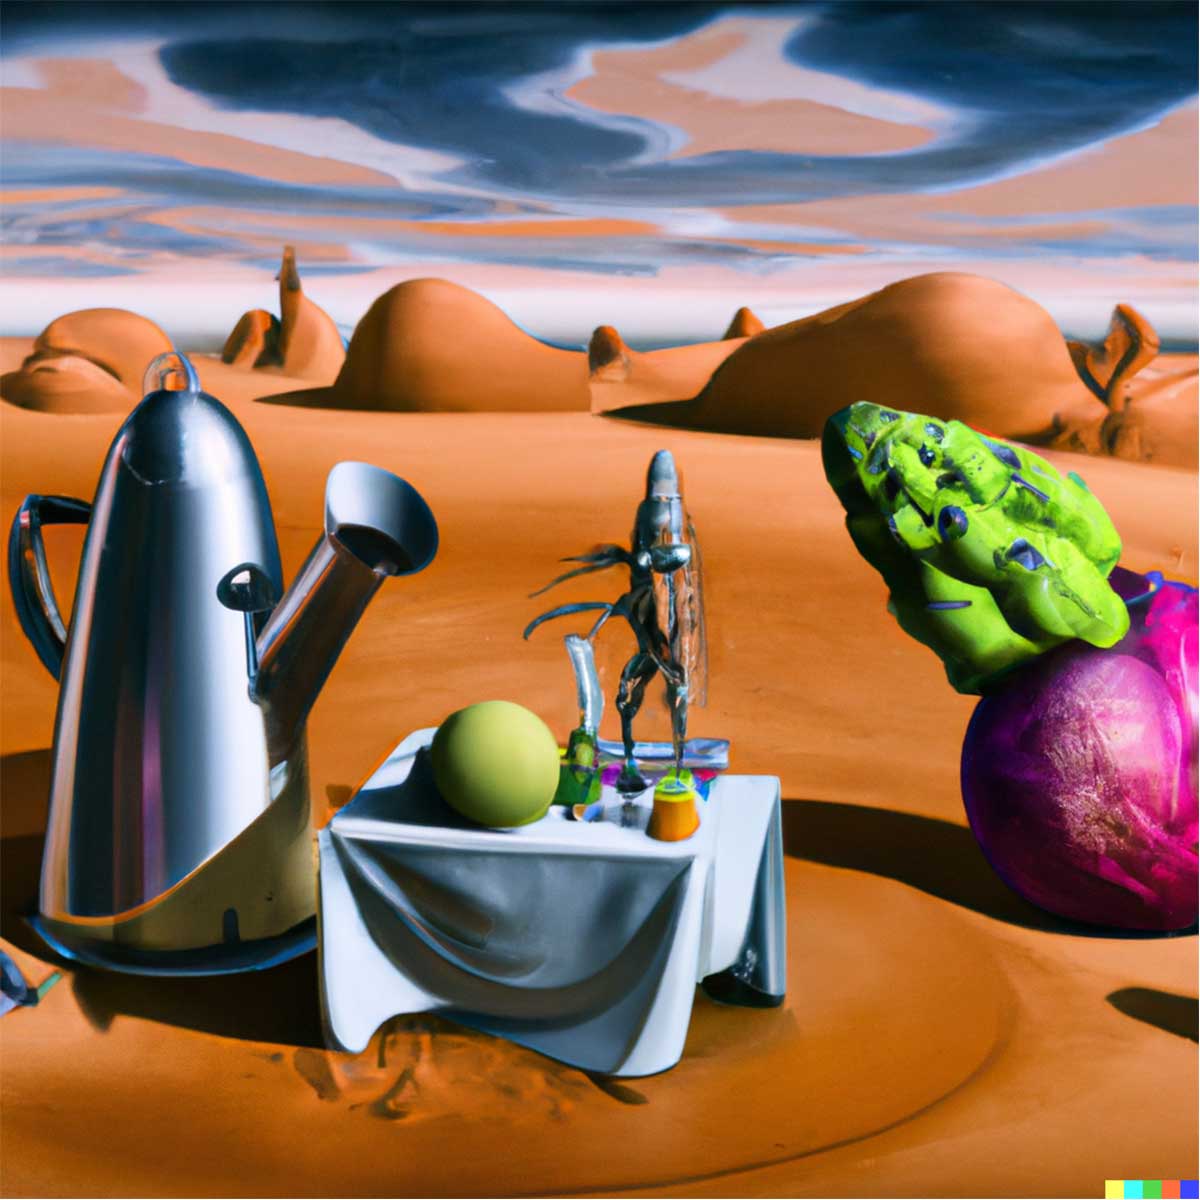 A still life on Mars in the style of Hieronymus Bosch, from DALL-E 2